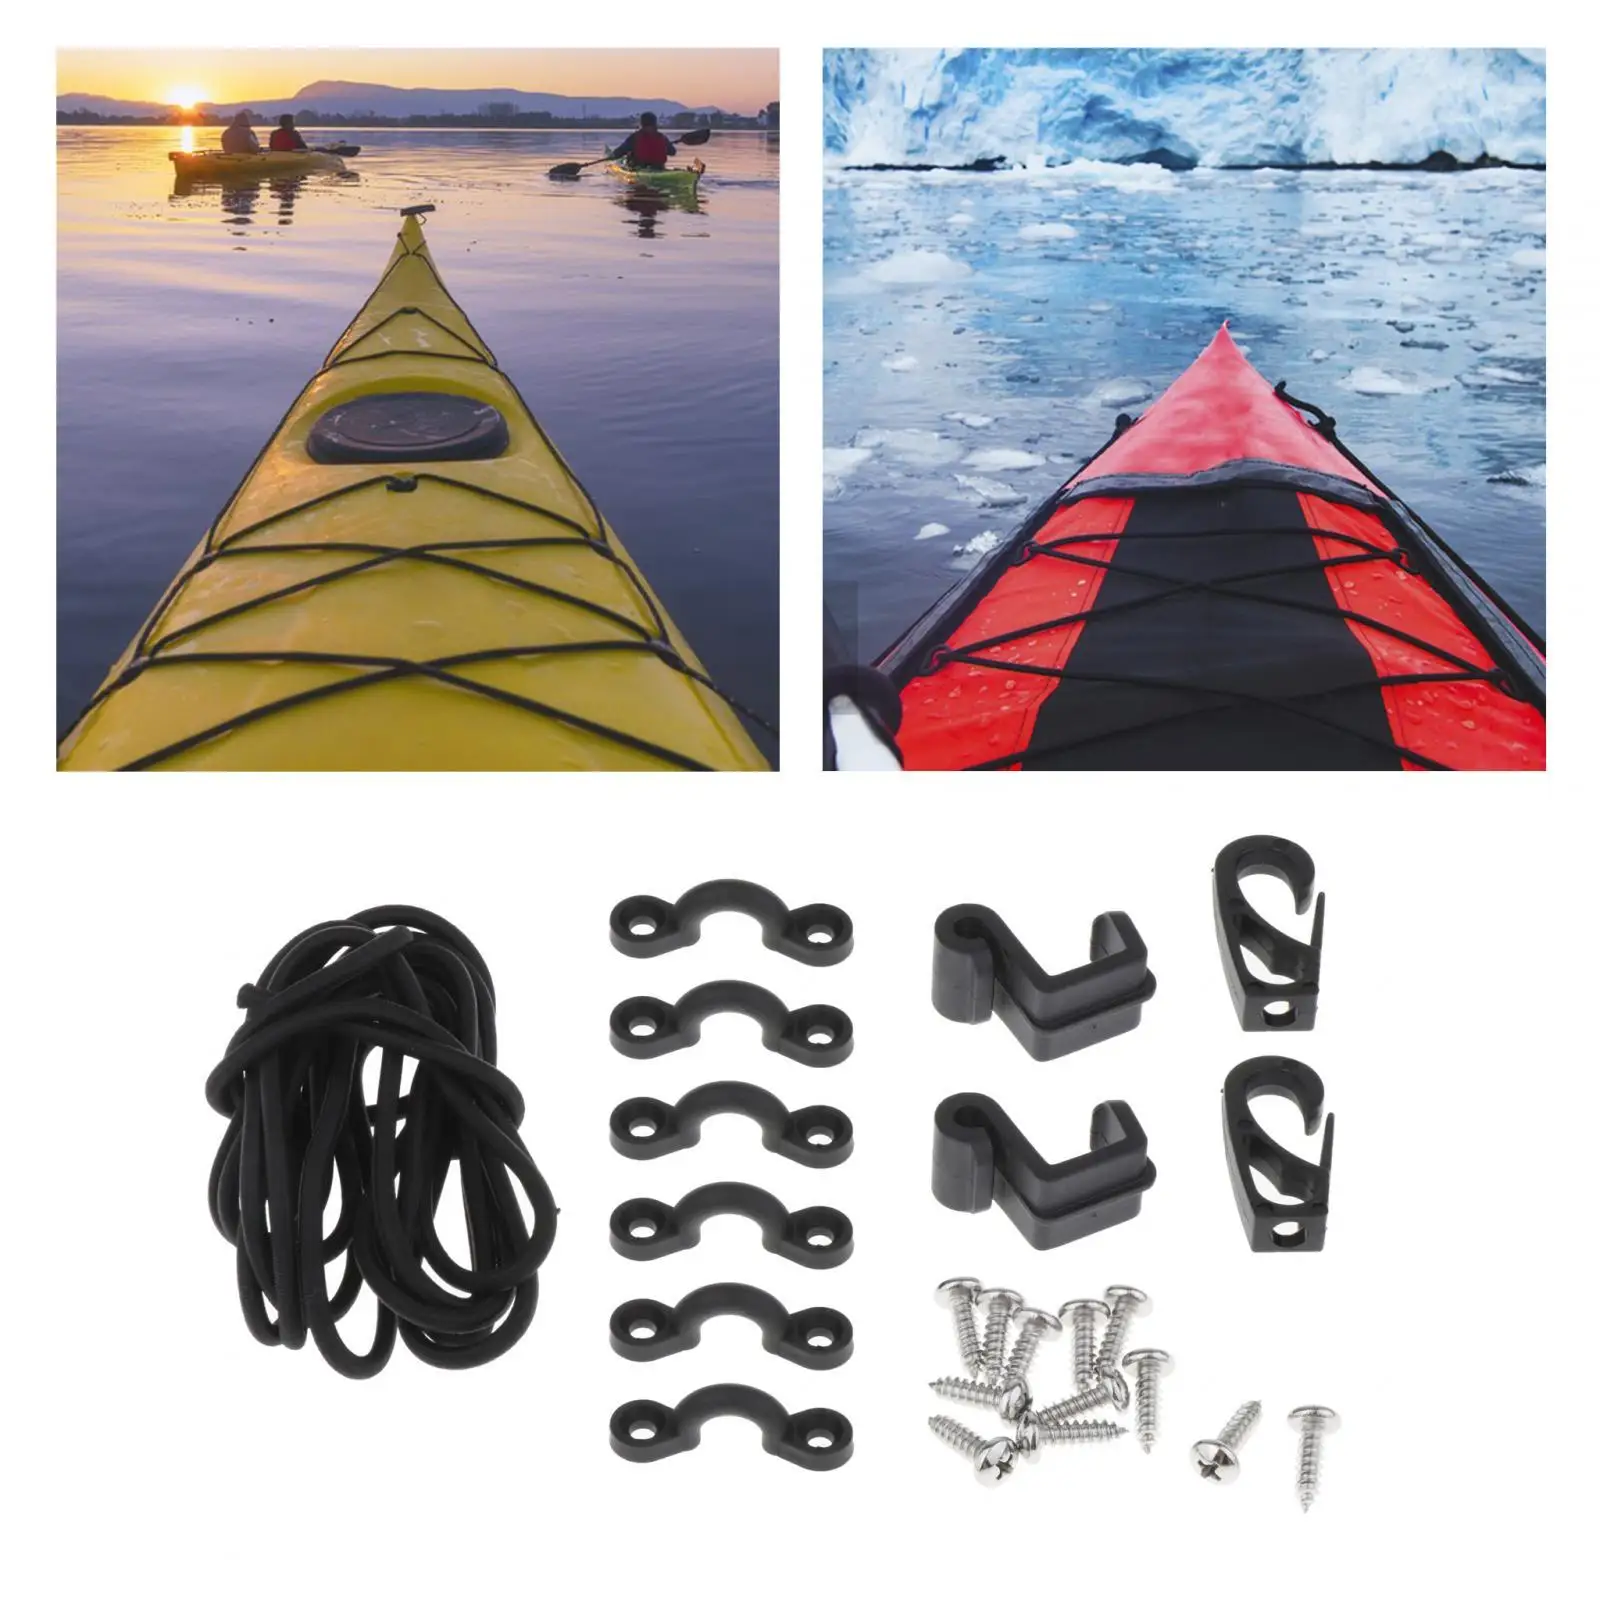 Kayak Deck Rigging Set Accessories Boat Outfitting Fishing Tie Down Pad Eye